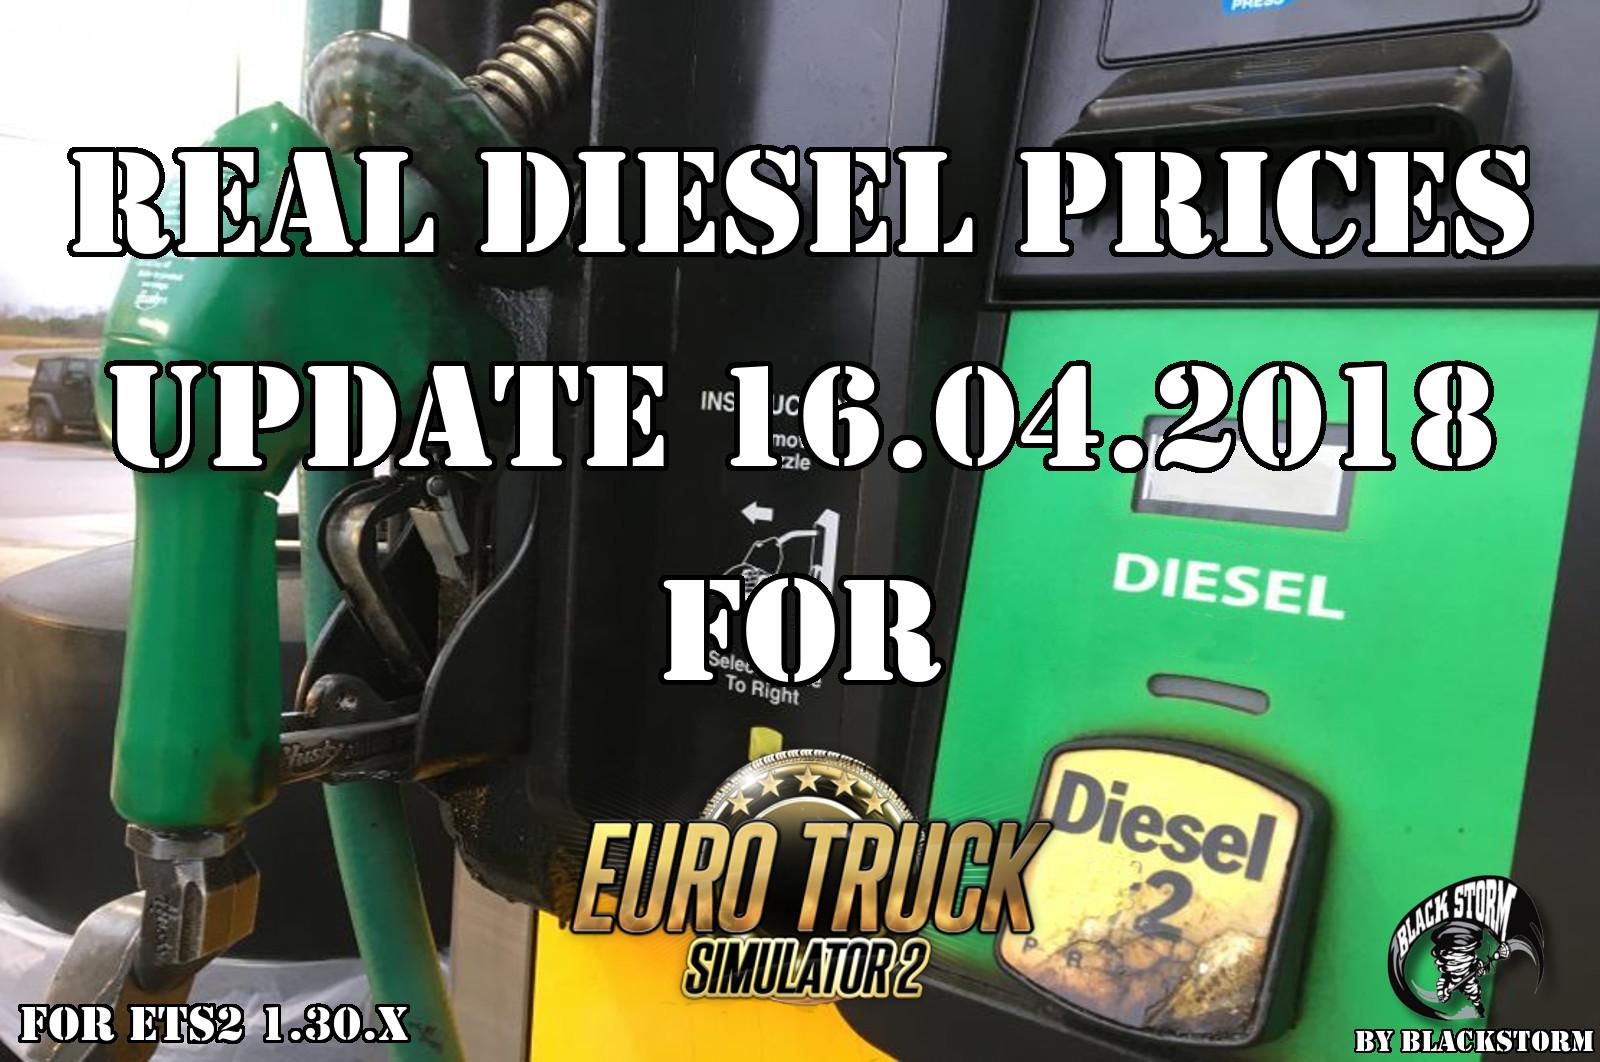 Real Diesel Prices for Euro Truck Simulator 2 map (updated 16/04/2018)